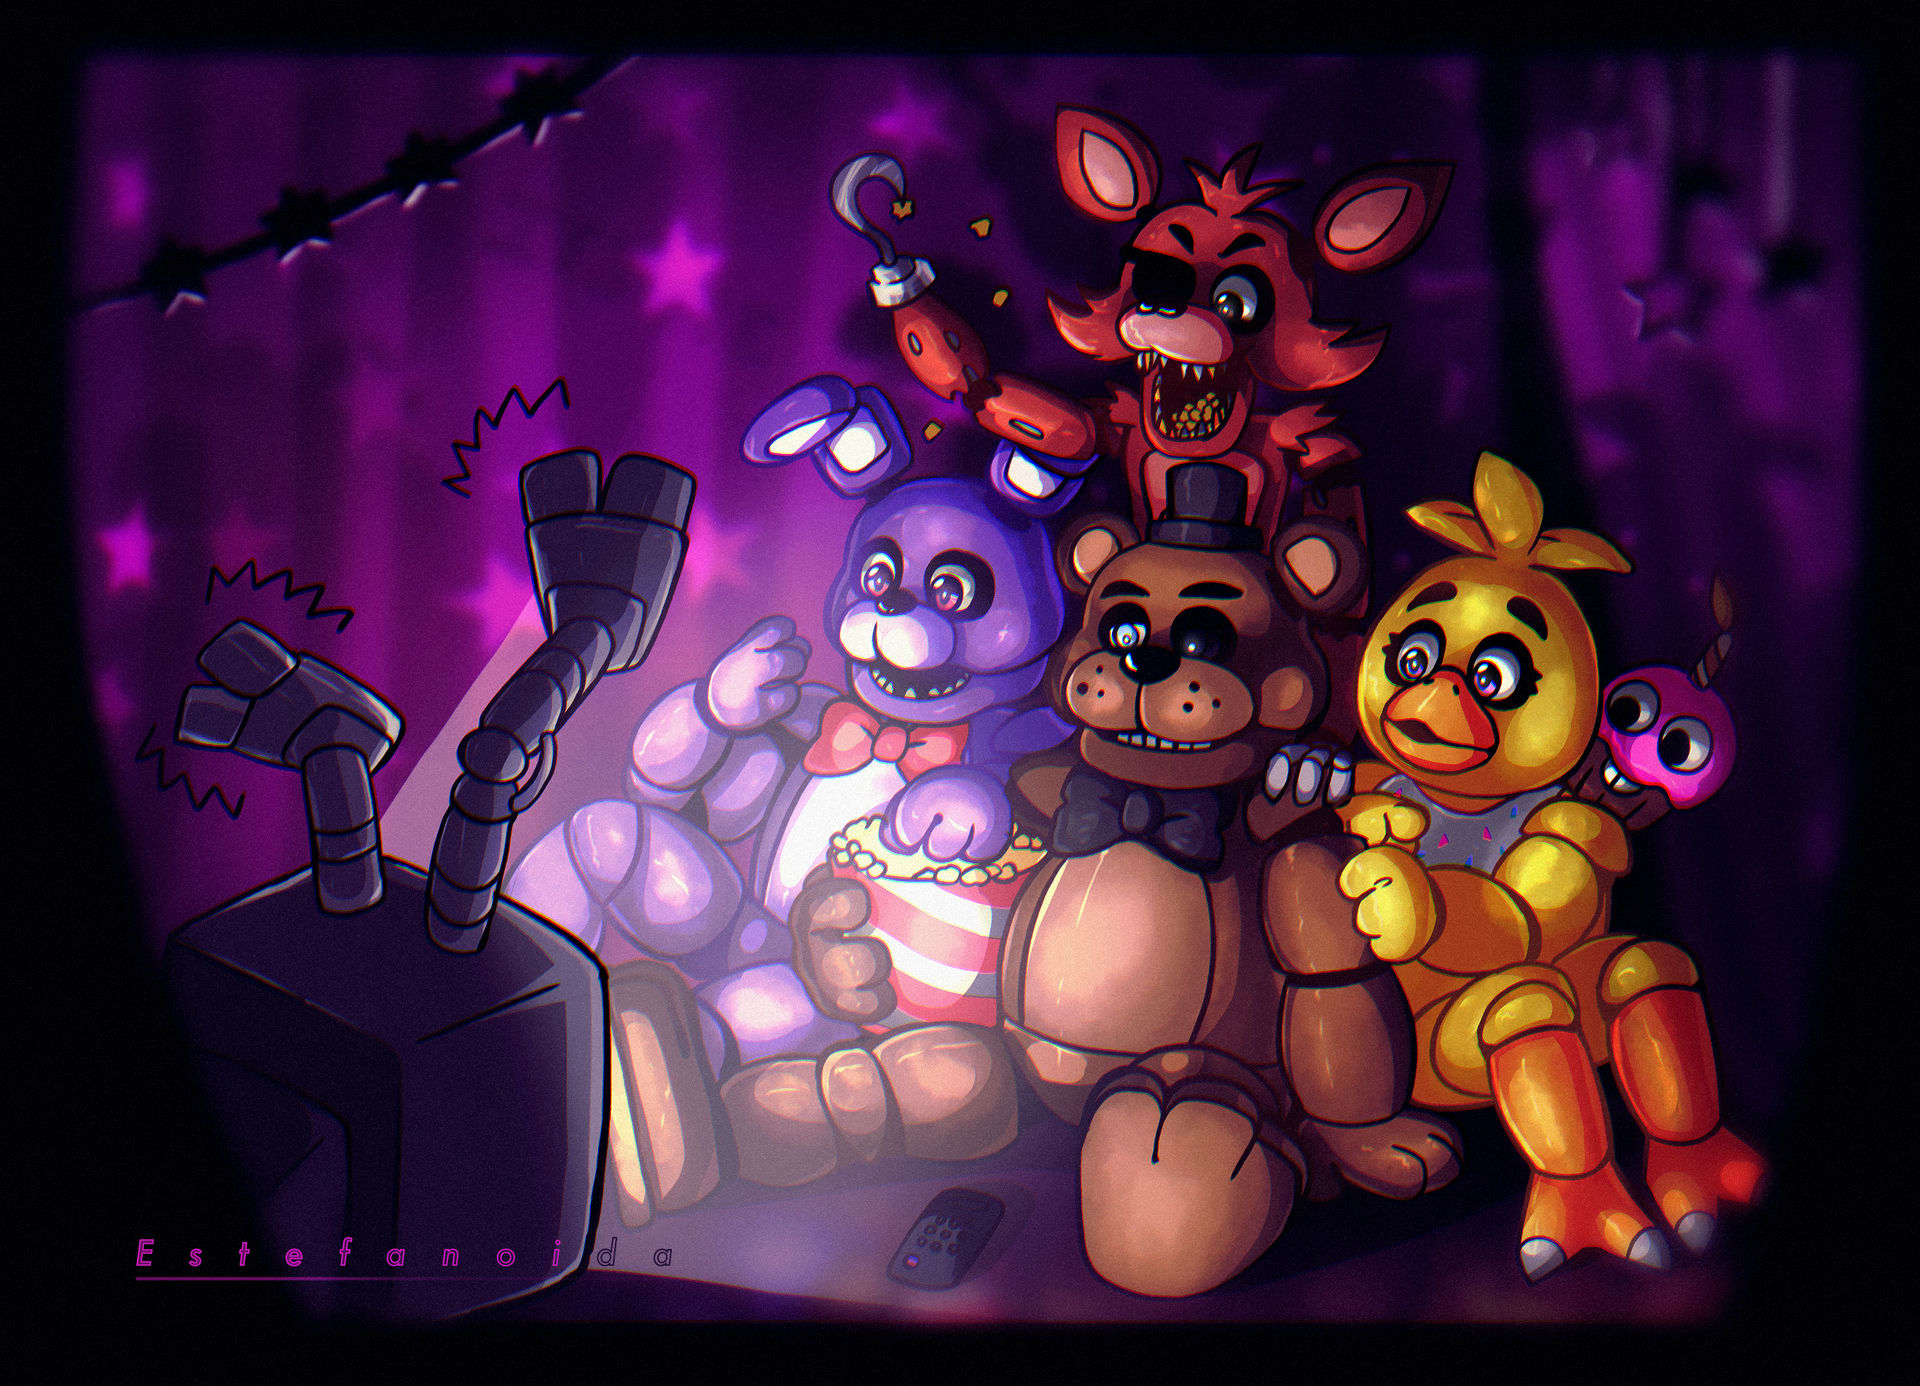 Five Nights At Freddy's Movie Wallpaper (Fanmade) by Danic574 on DeviantArt